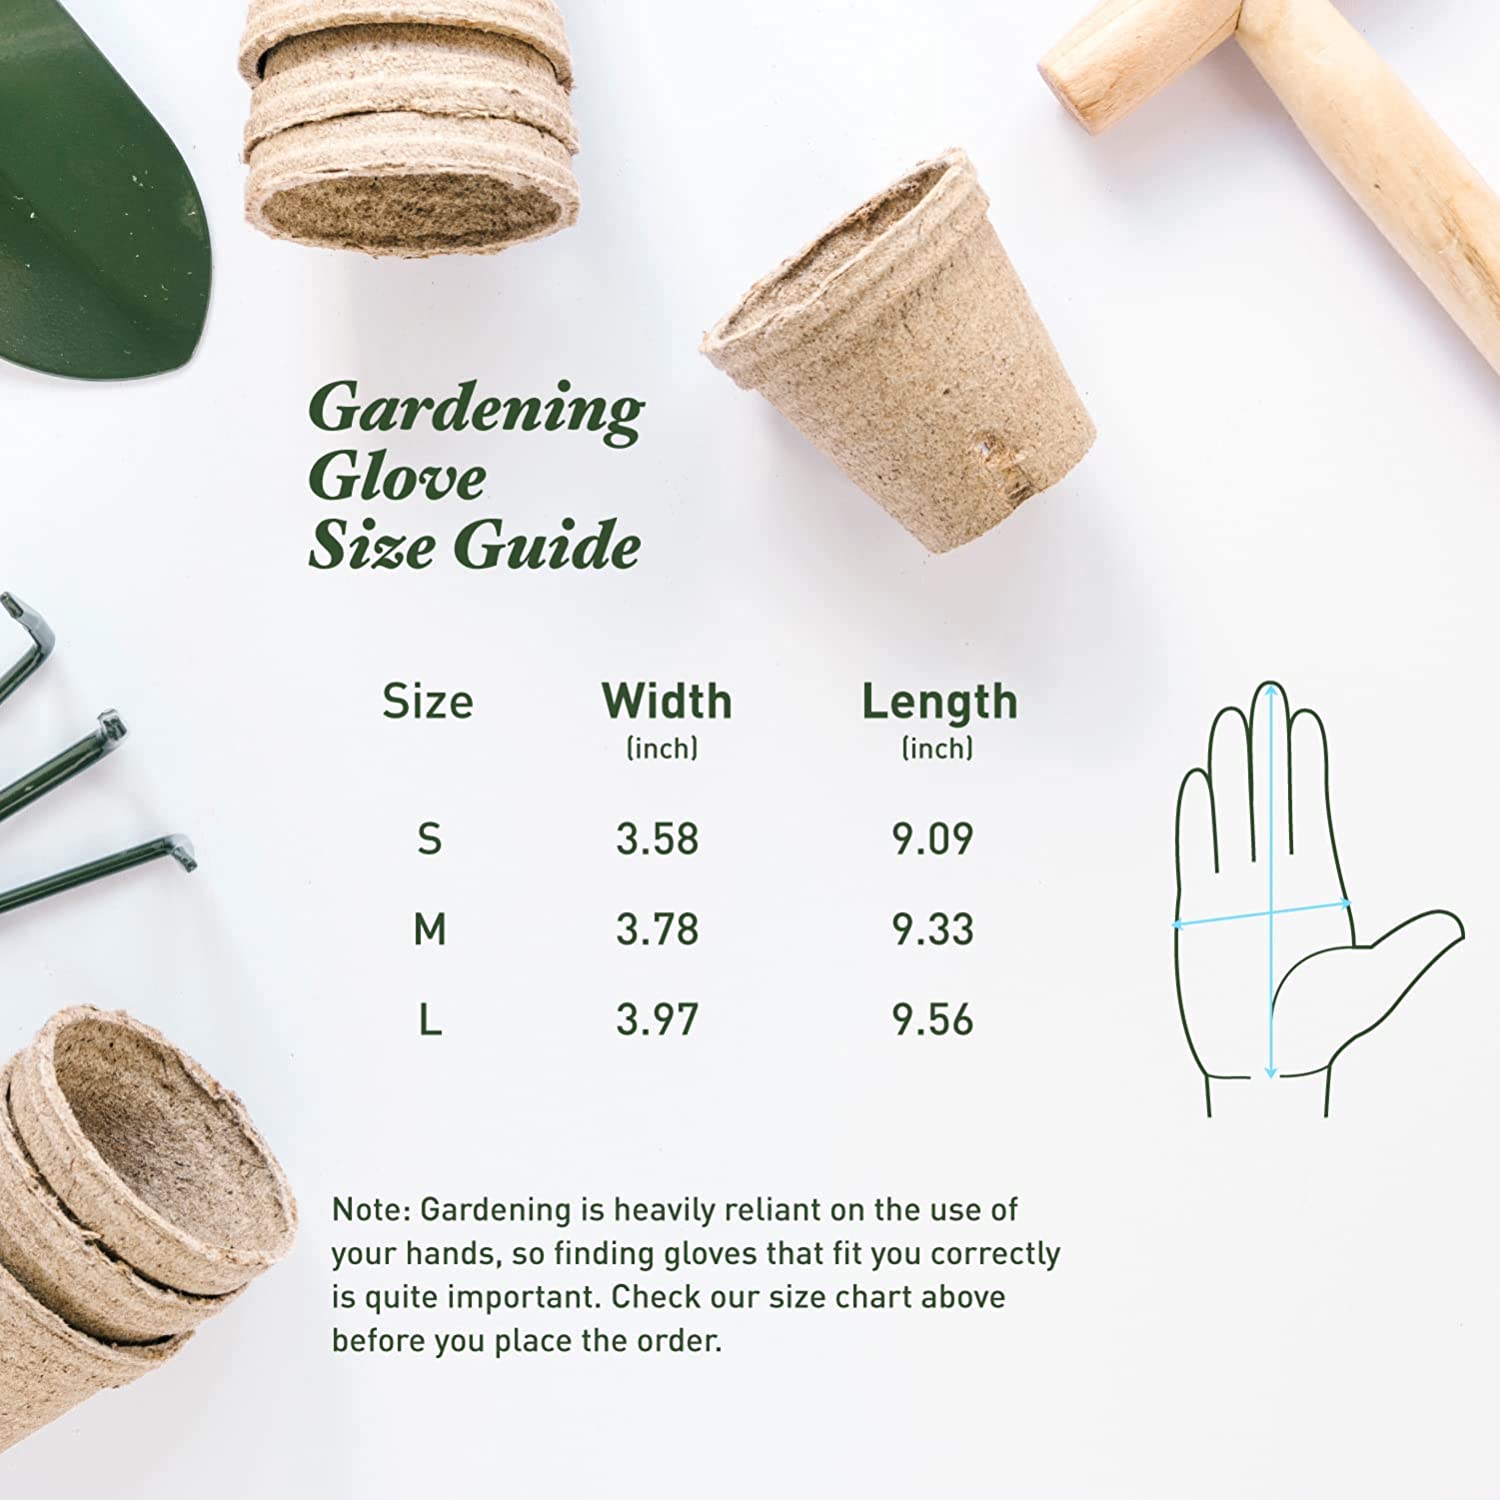 Thorn Proof Gardening Gloves for Women, Breathable and Touchscreen in size small, medium and large